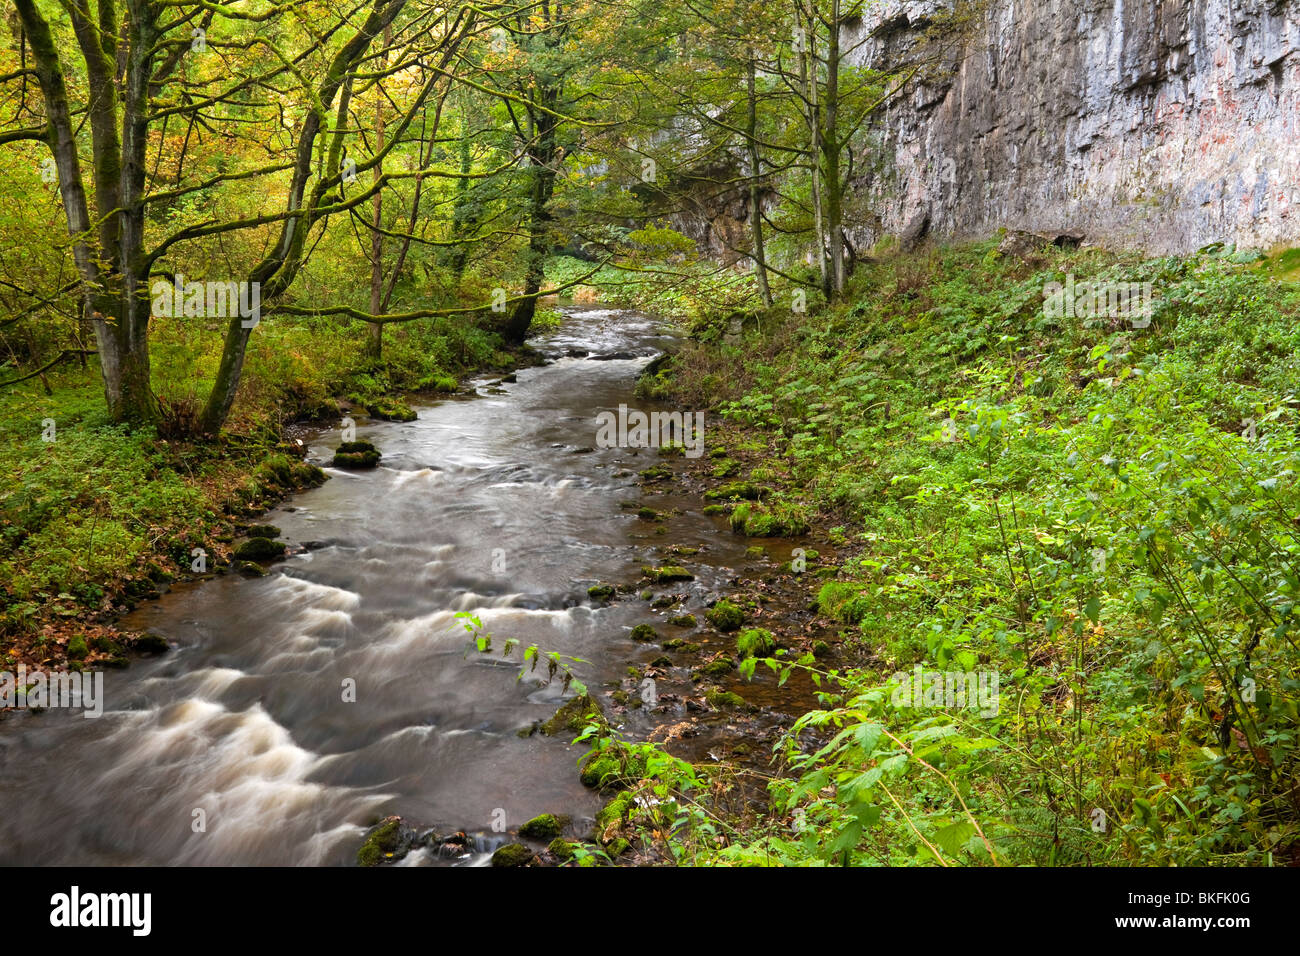 River Wye with rocks and cliff in foreground at Chee Dale near Bakewell in the Peak District National Park Derbyshire England UK Stock Photo